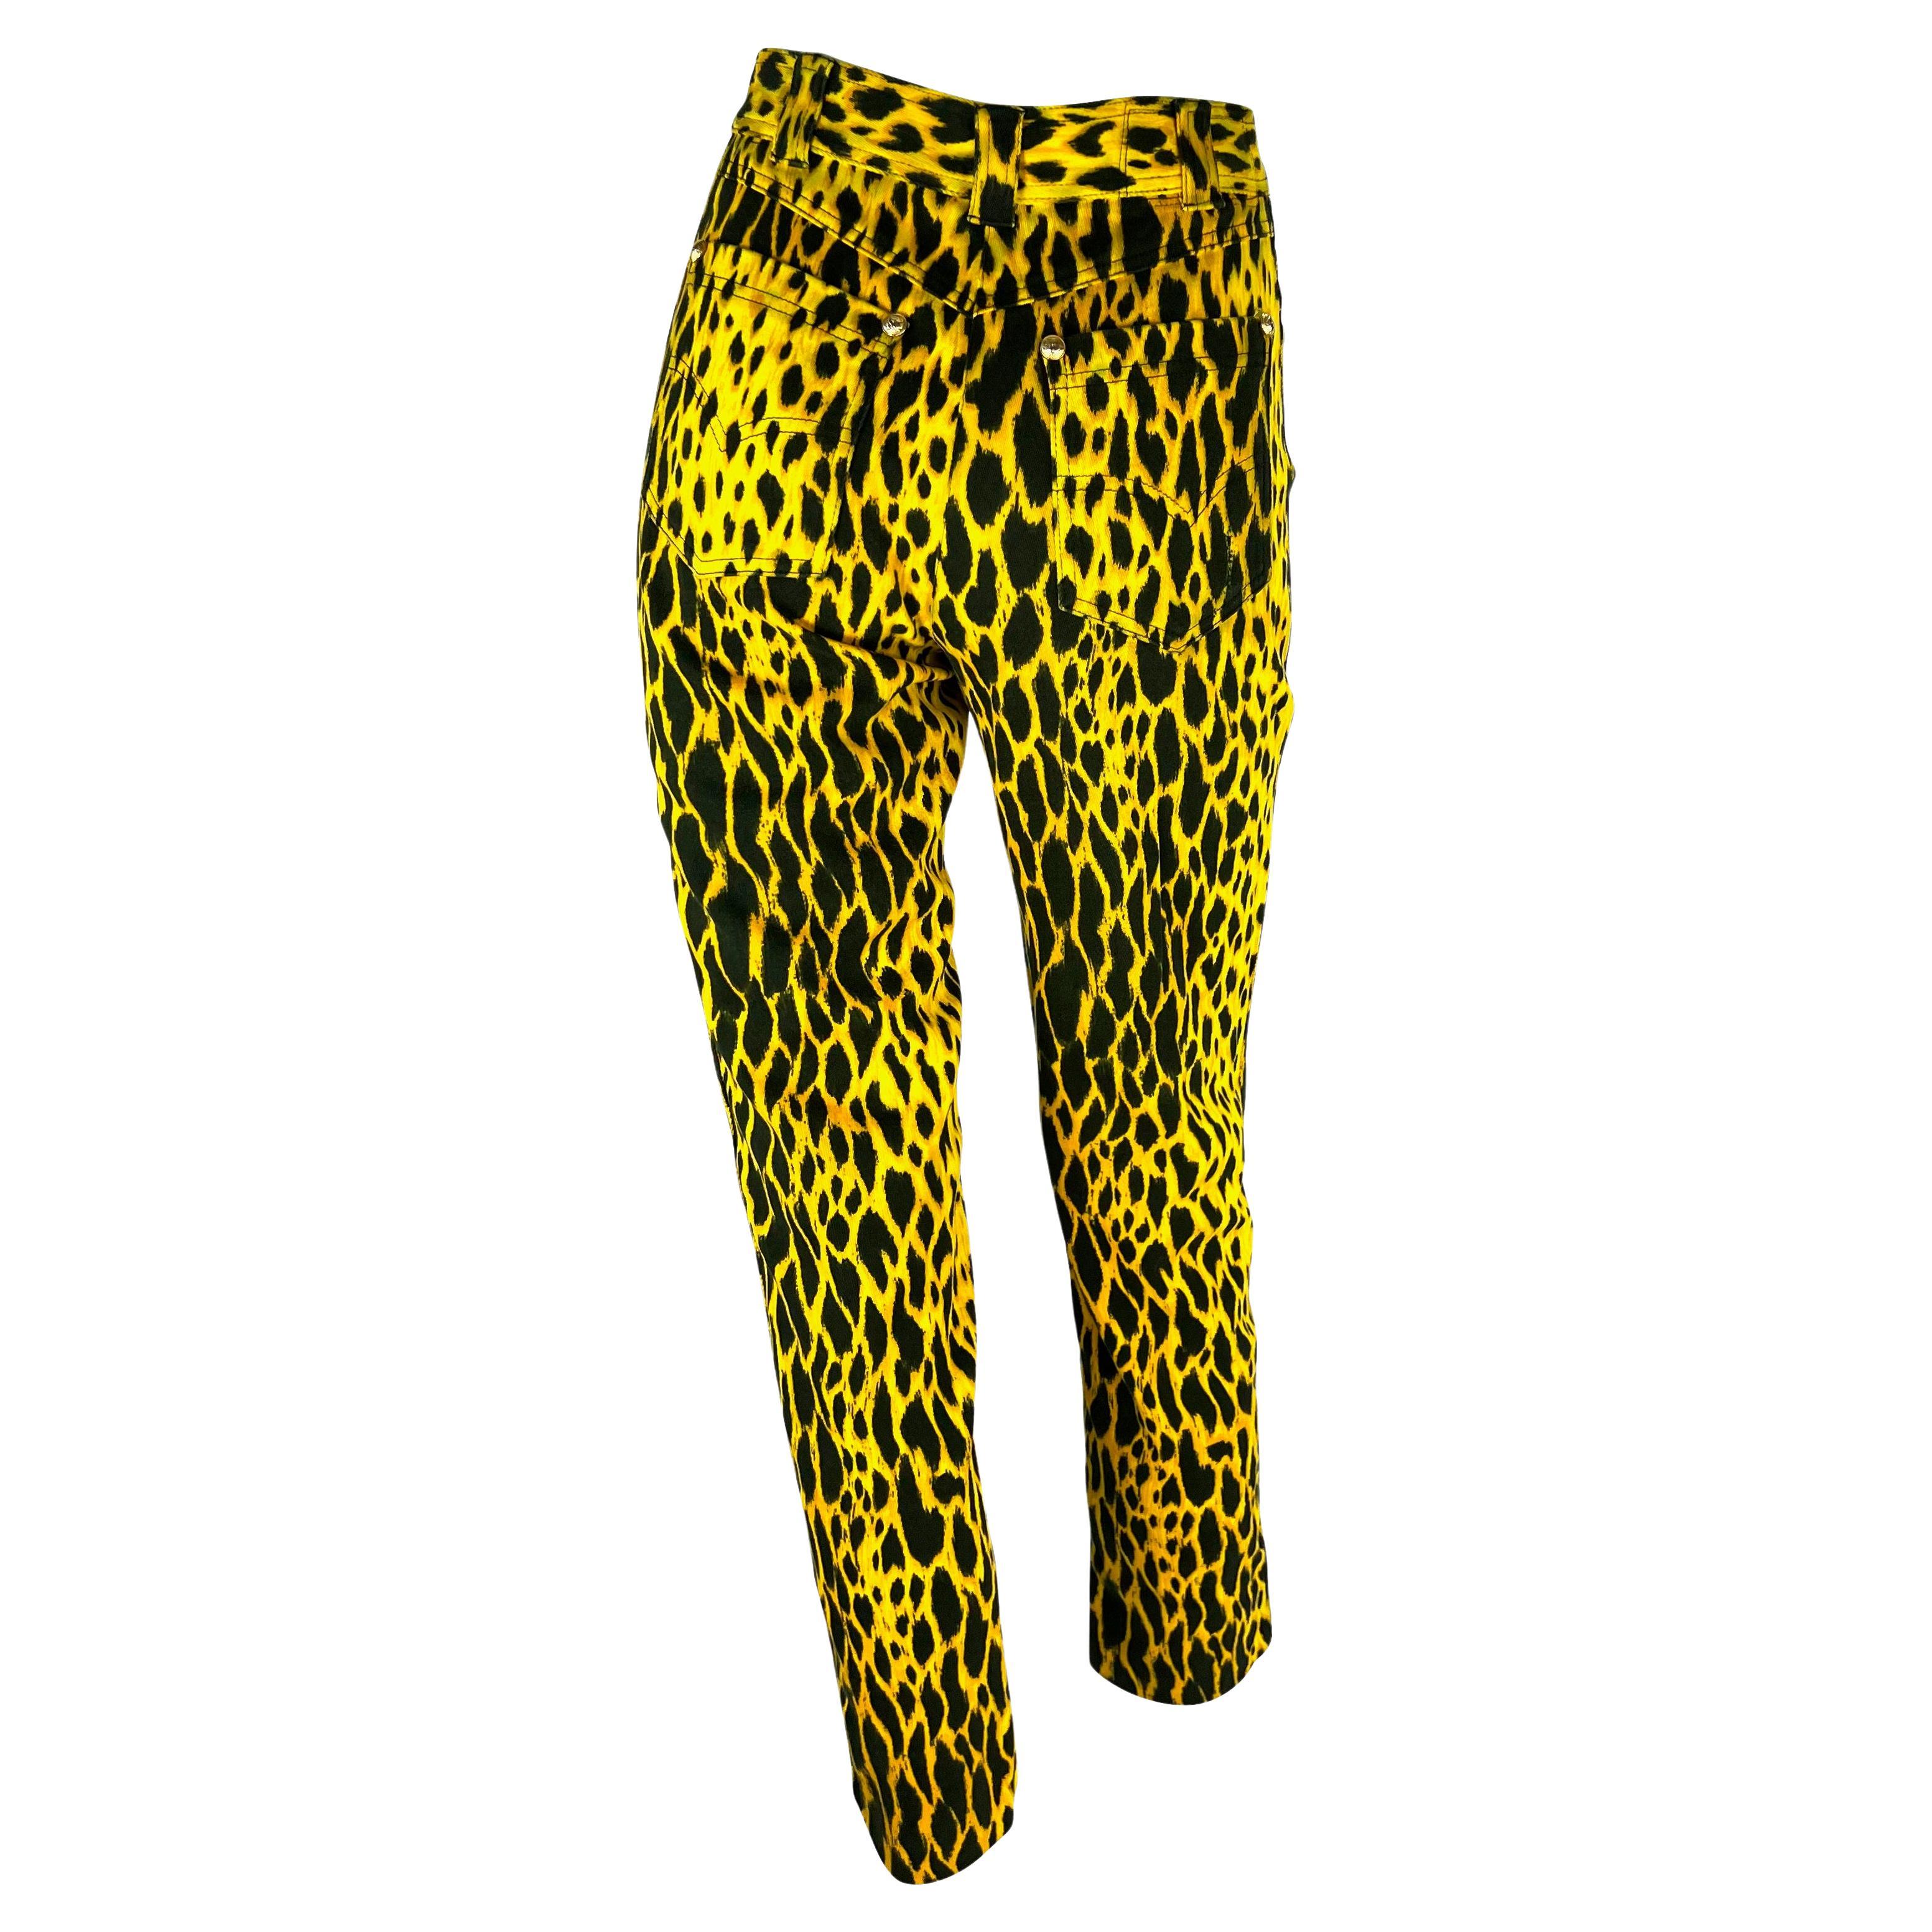 Women's S/S 1992 Gianni Versace Runway Cheetah Print Yellow Black Cotton Stretch Jeans For Sale